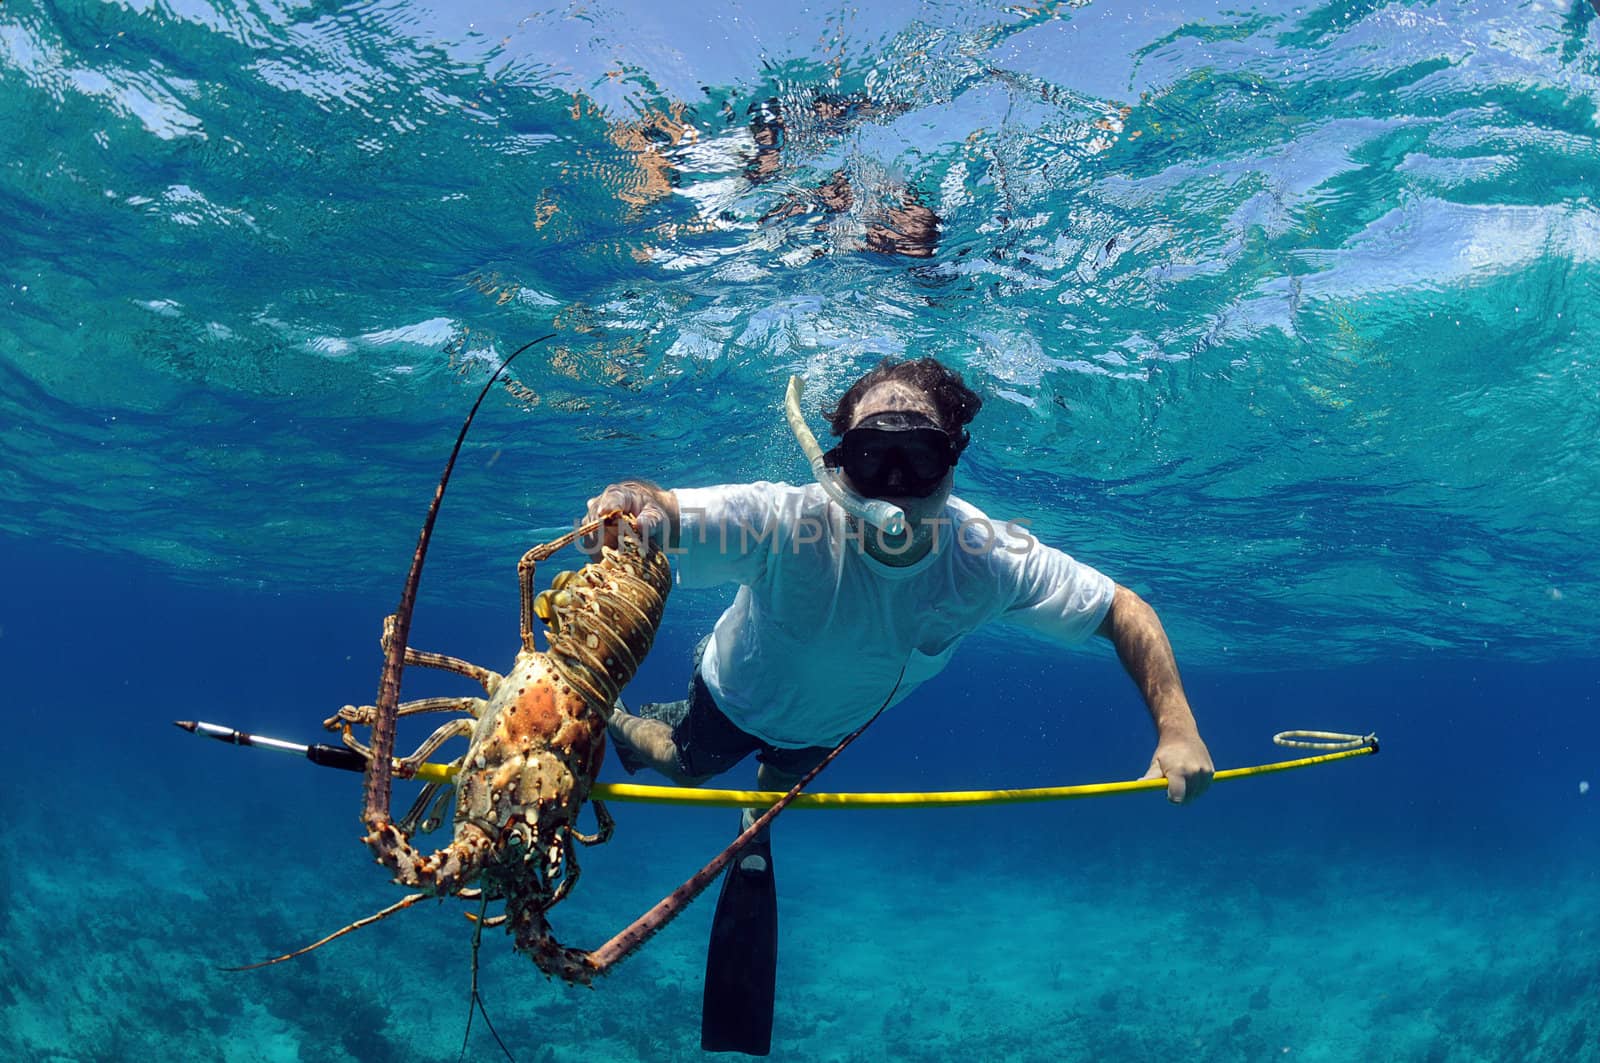 Spearfishing for lobster by ftlaudgirl